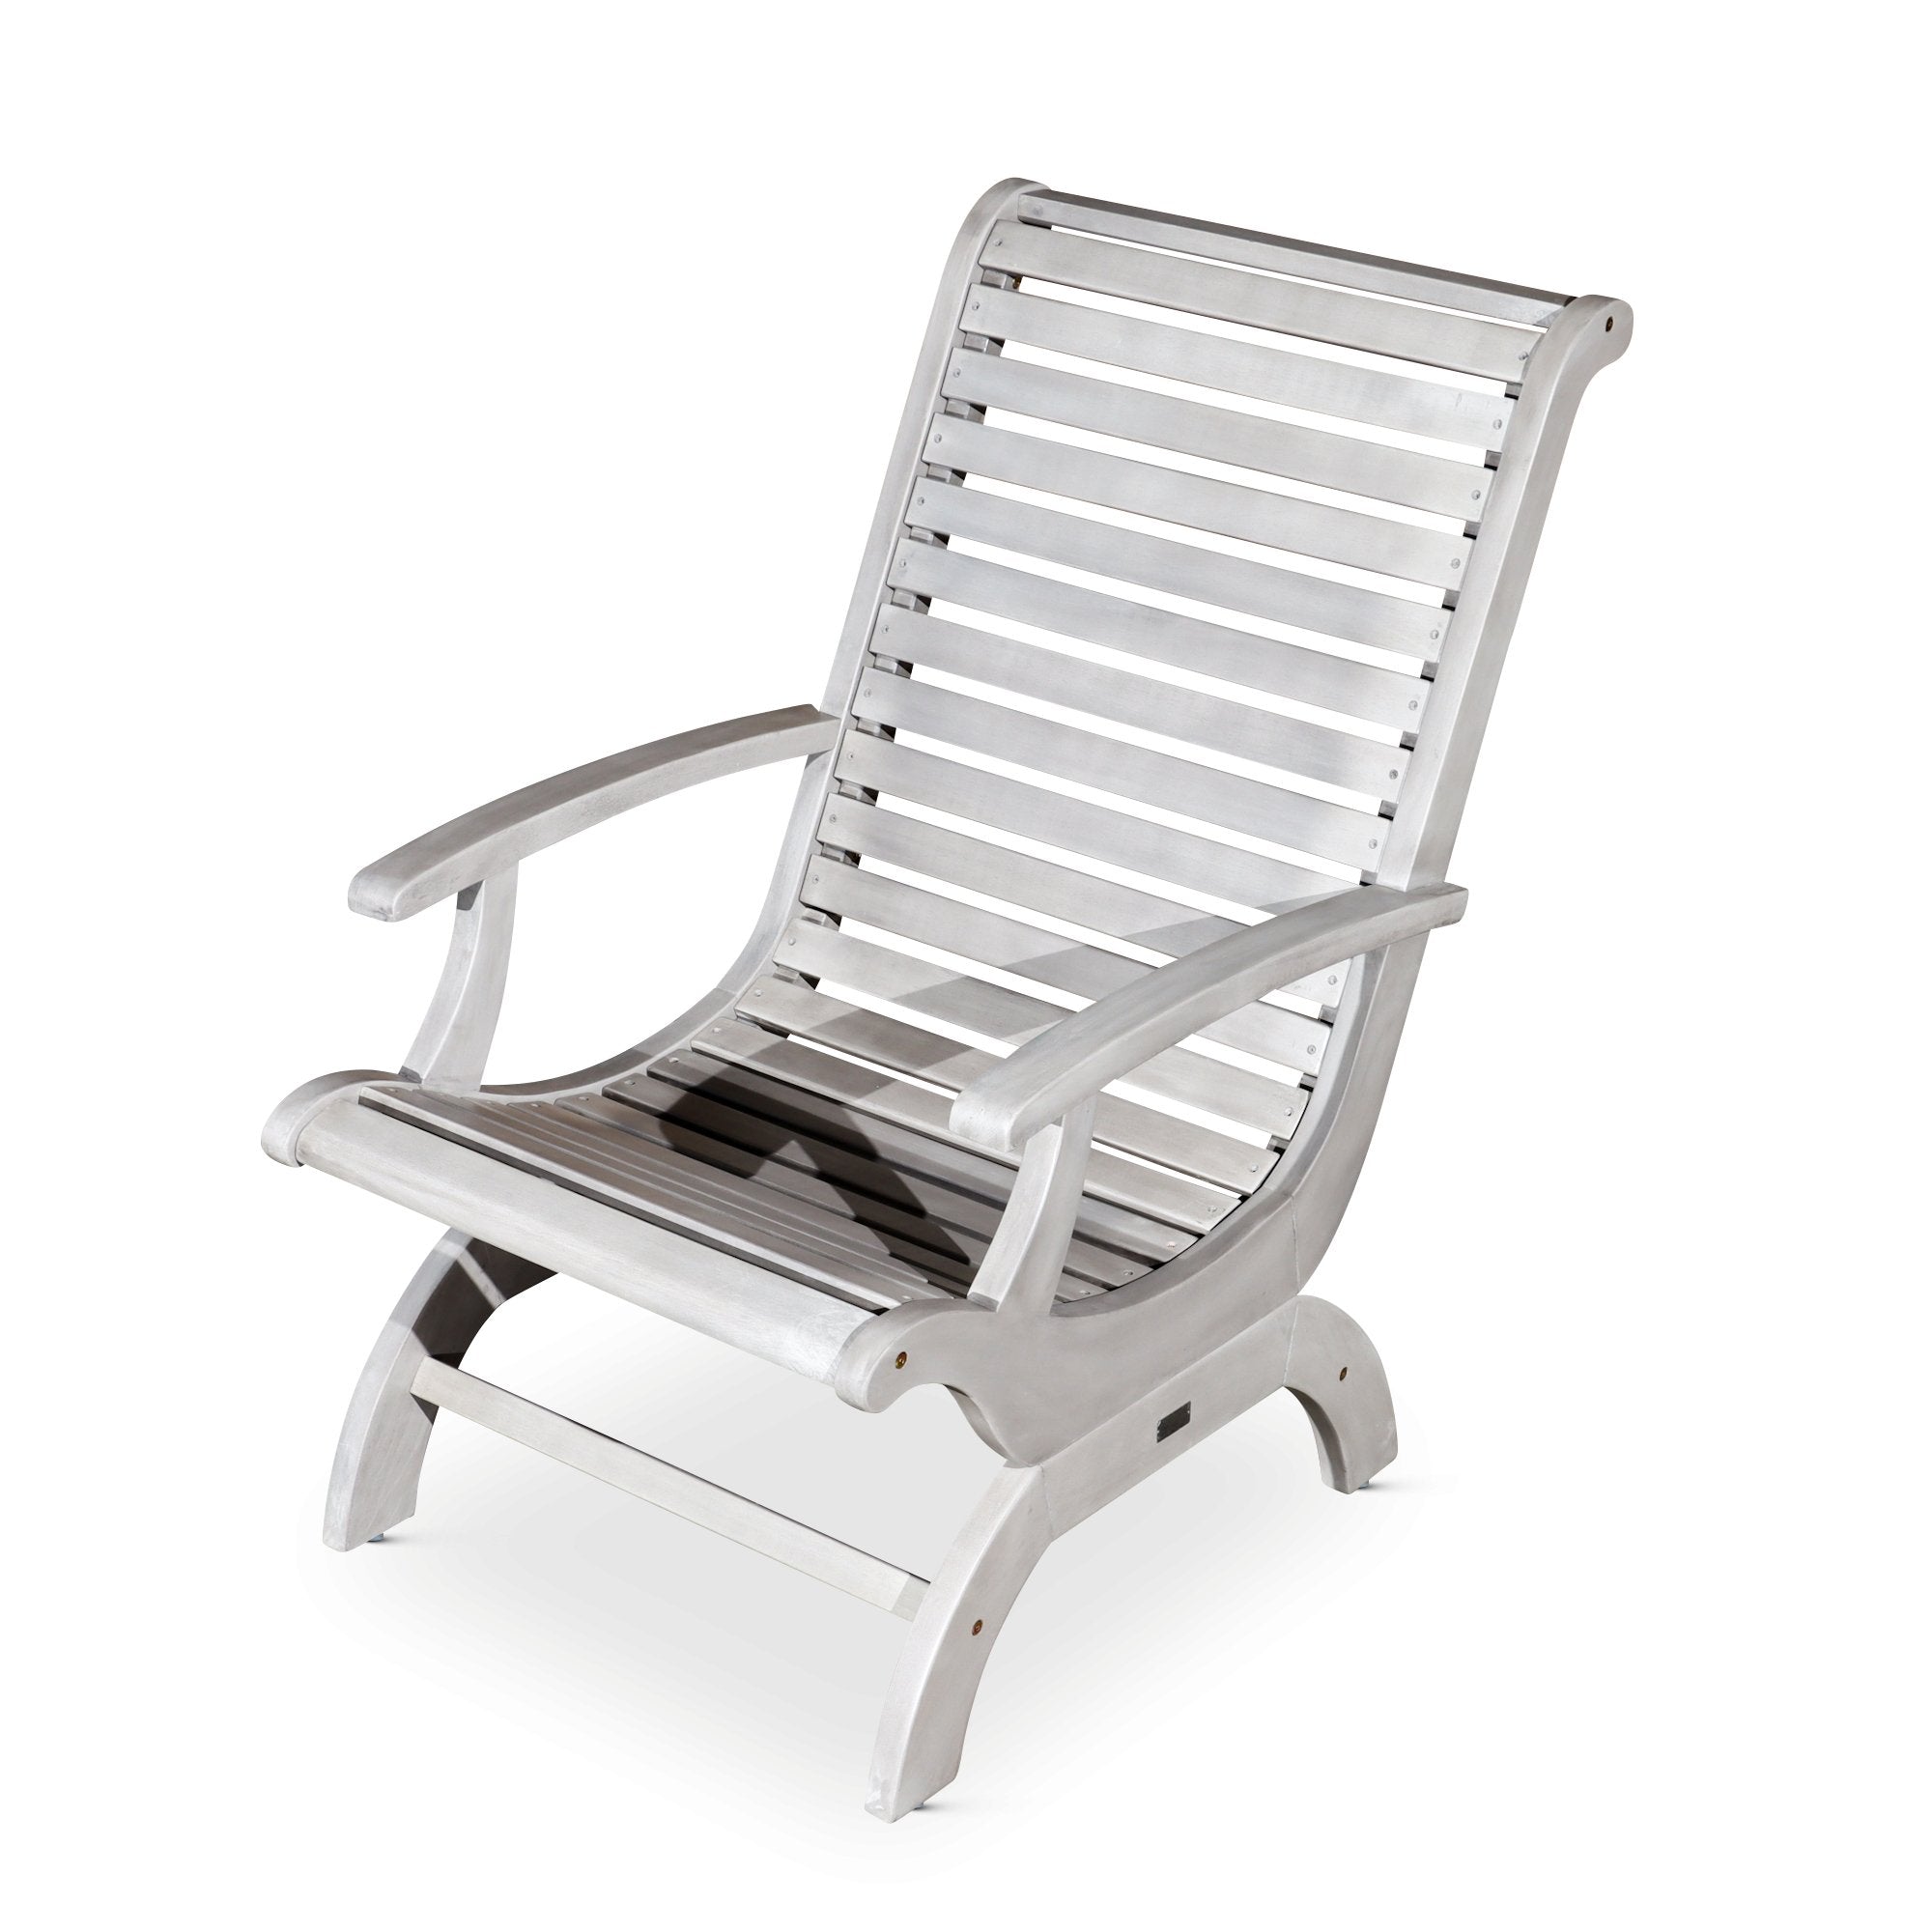 Outdoor Plantation Chair, Silver Gray - Tuesday Morning-Chairs & Seating